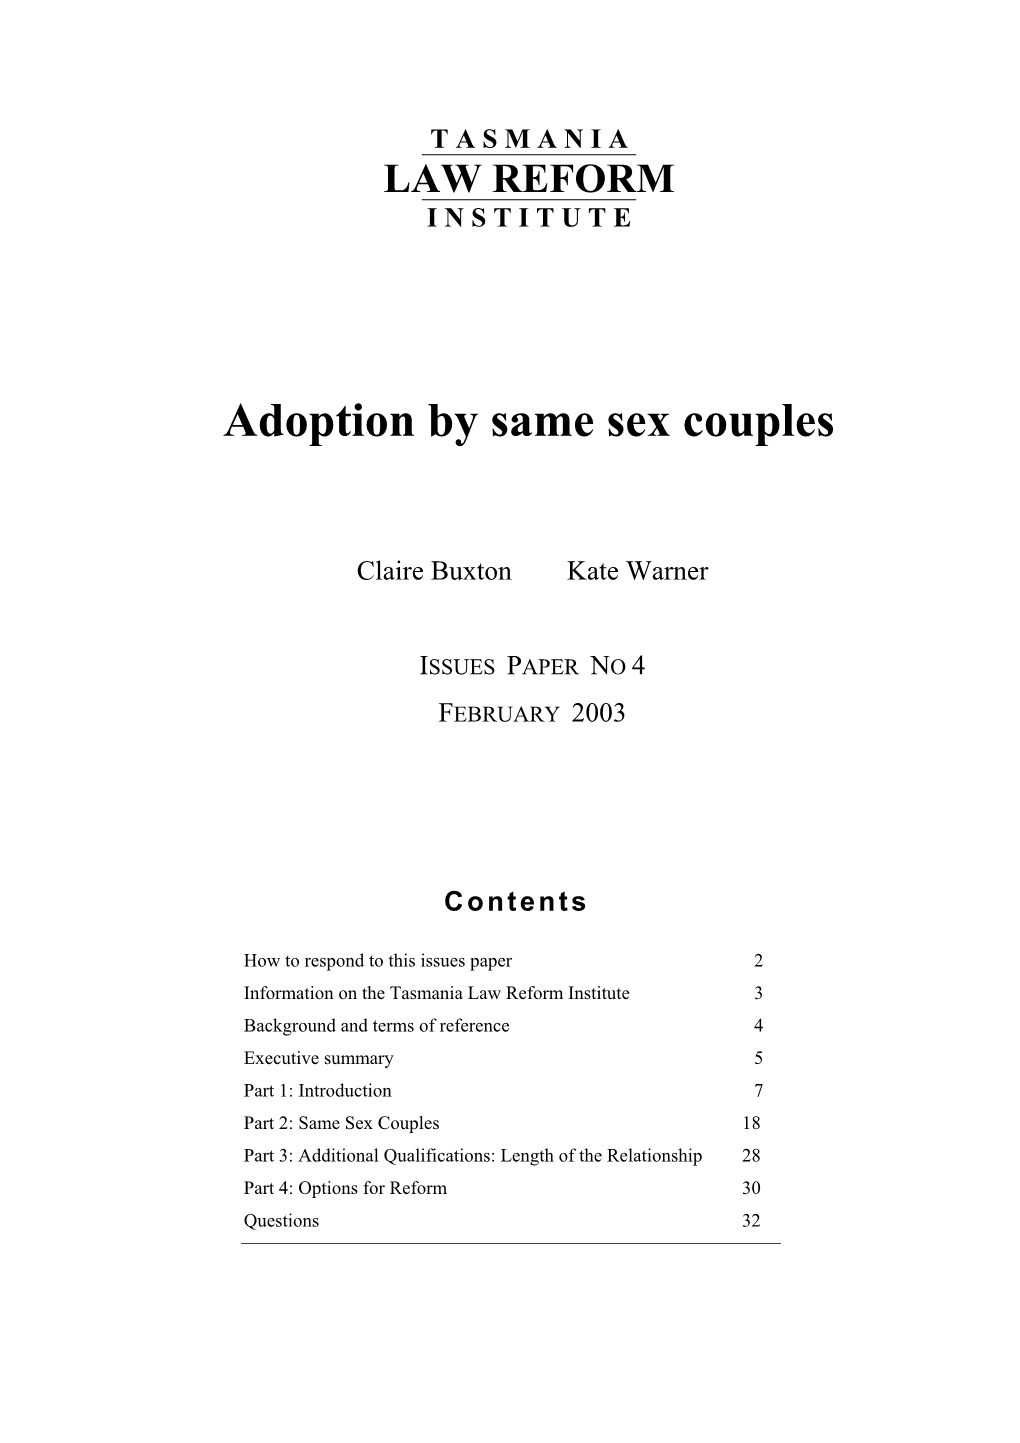 Adoption by Same Sex Couples